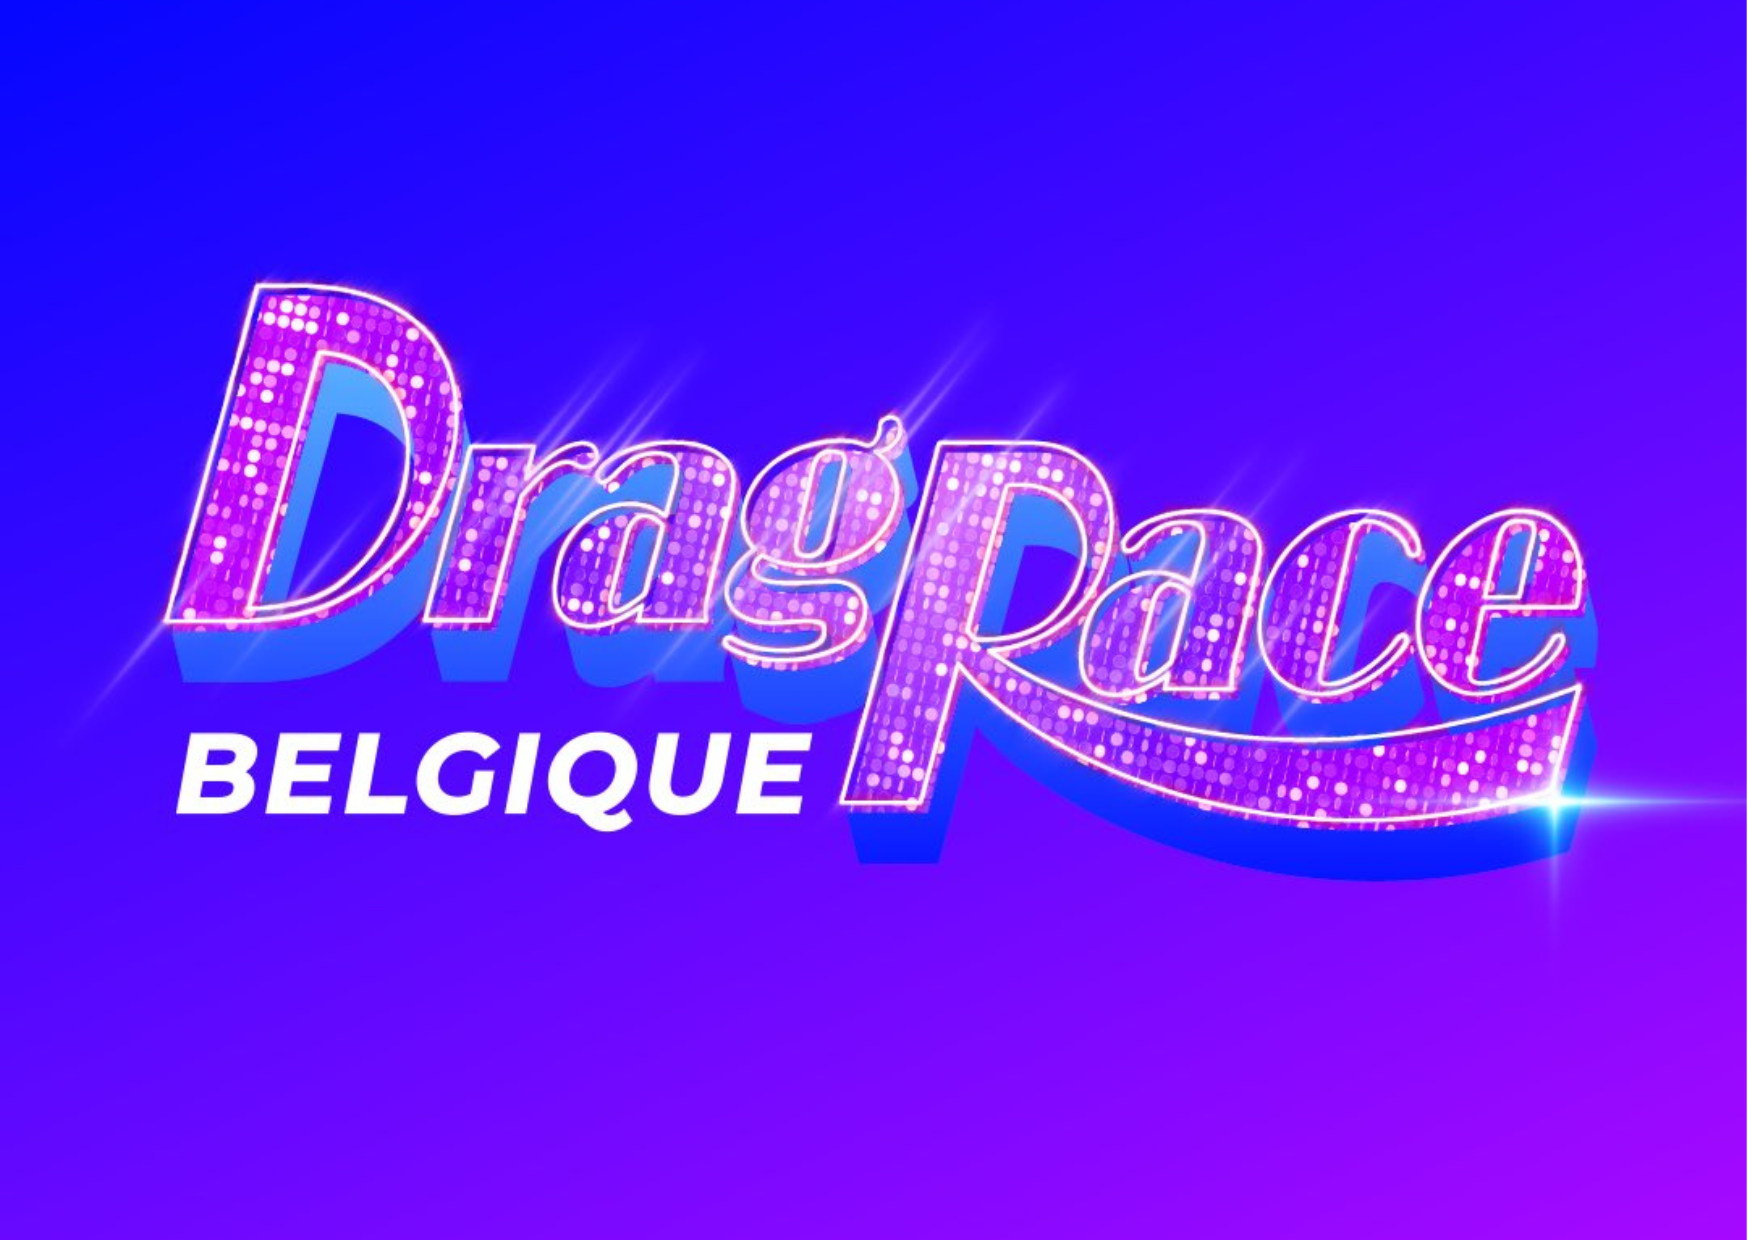 Fierce (feat. Laura Crowe & Him) - song and lyrics by The Cast of Drag Race  Belgique, Laura Crowe & Him